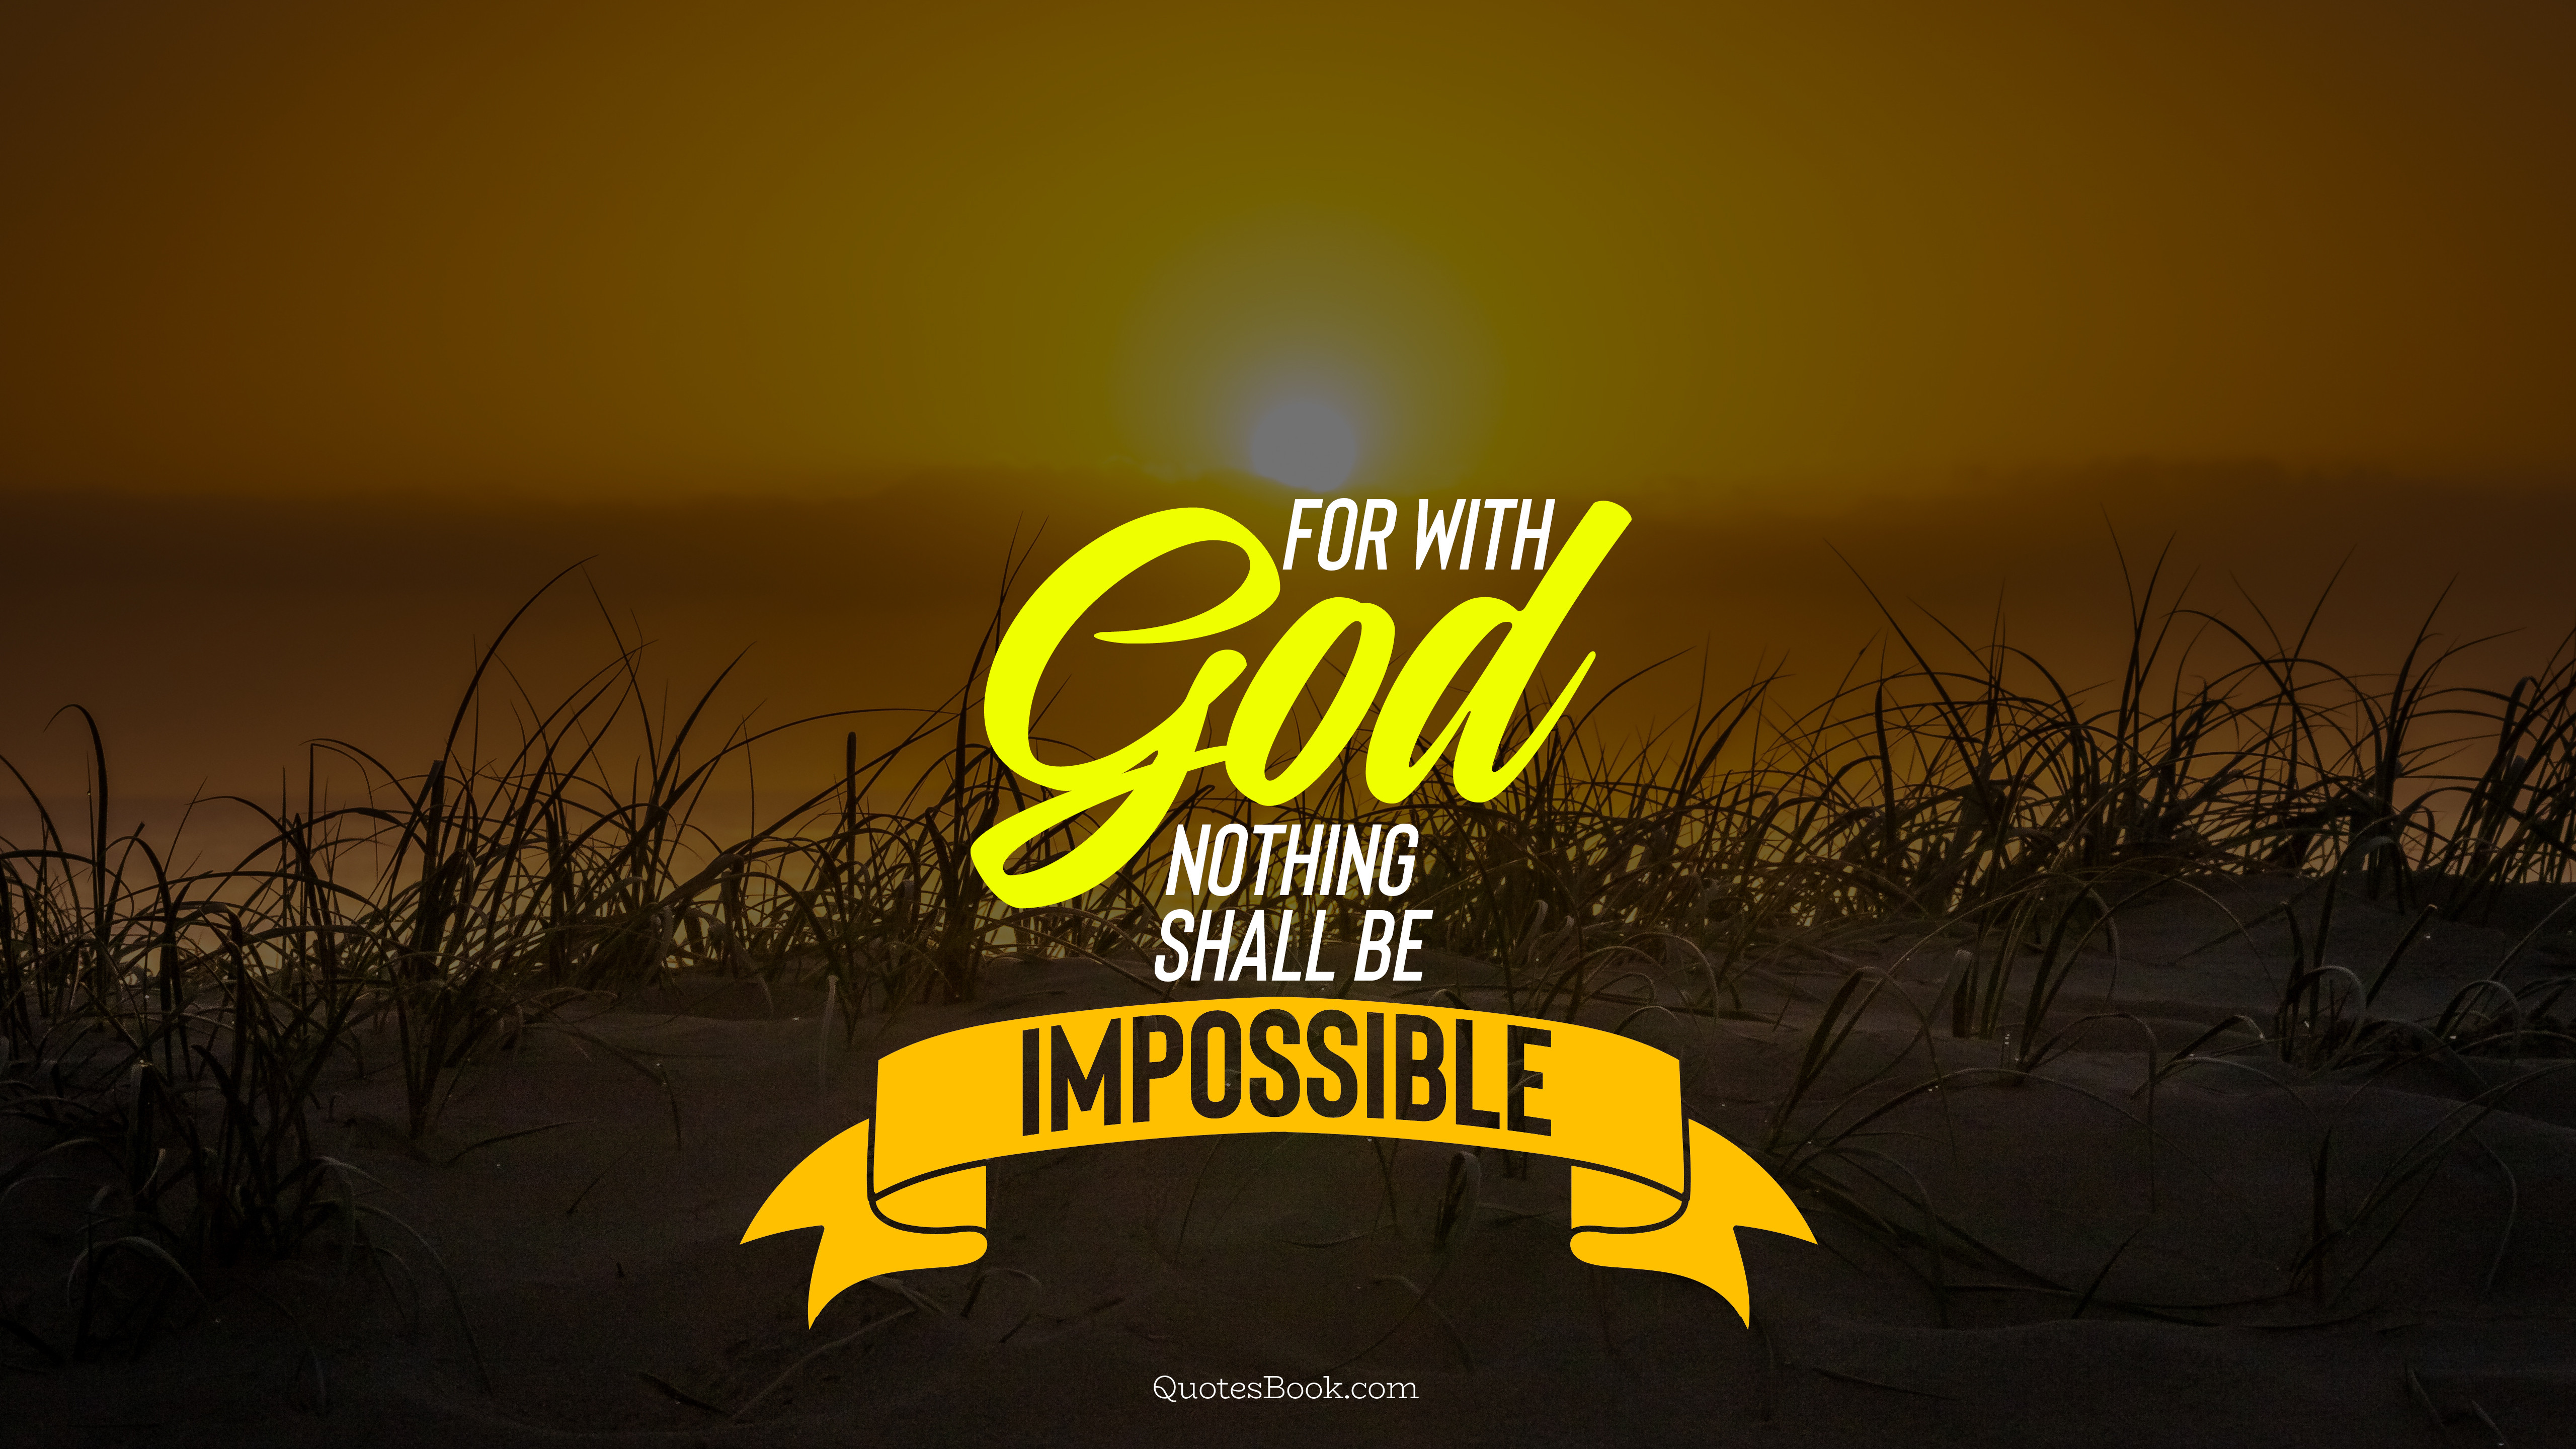 for with god nothing shall be impossible 5120x2880 3330